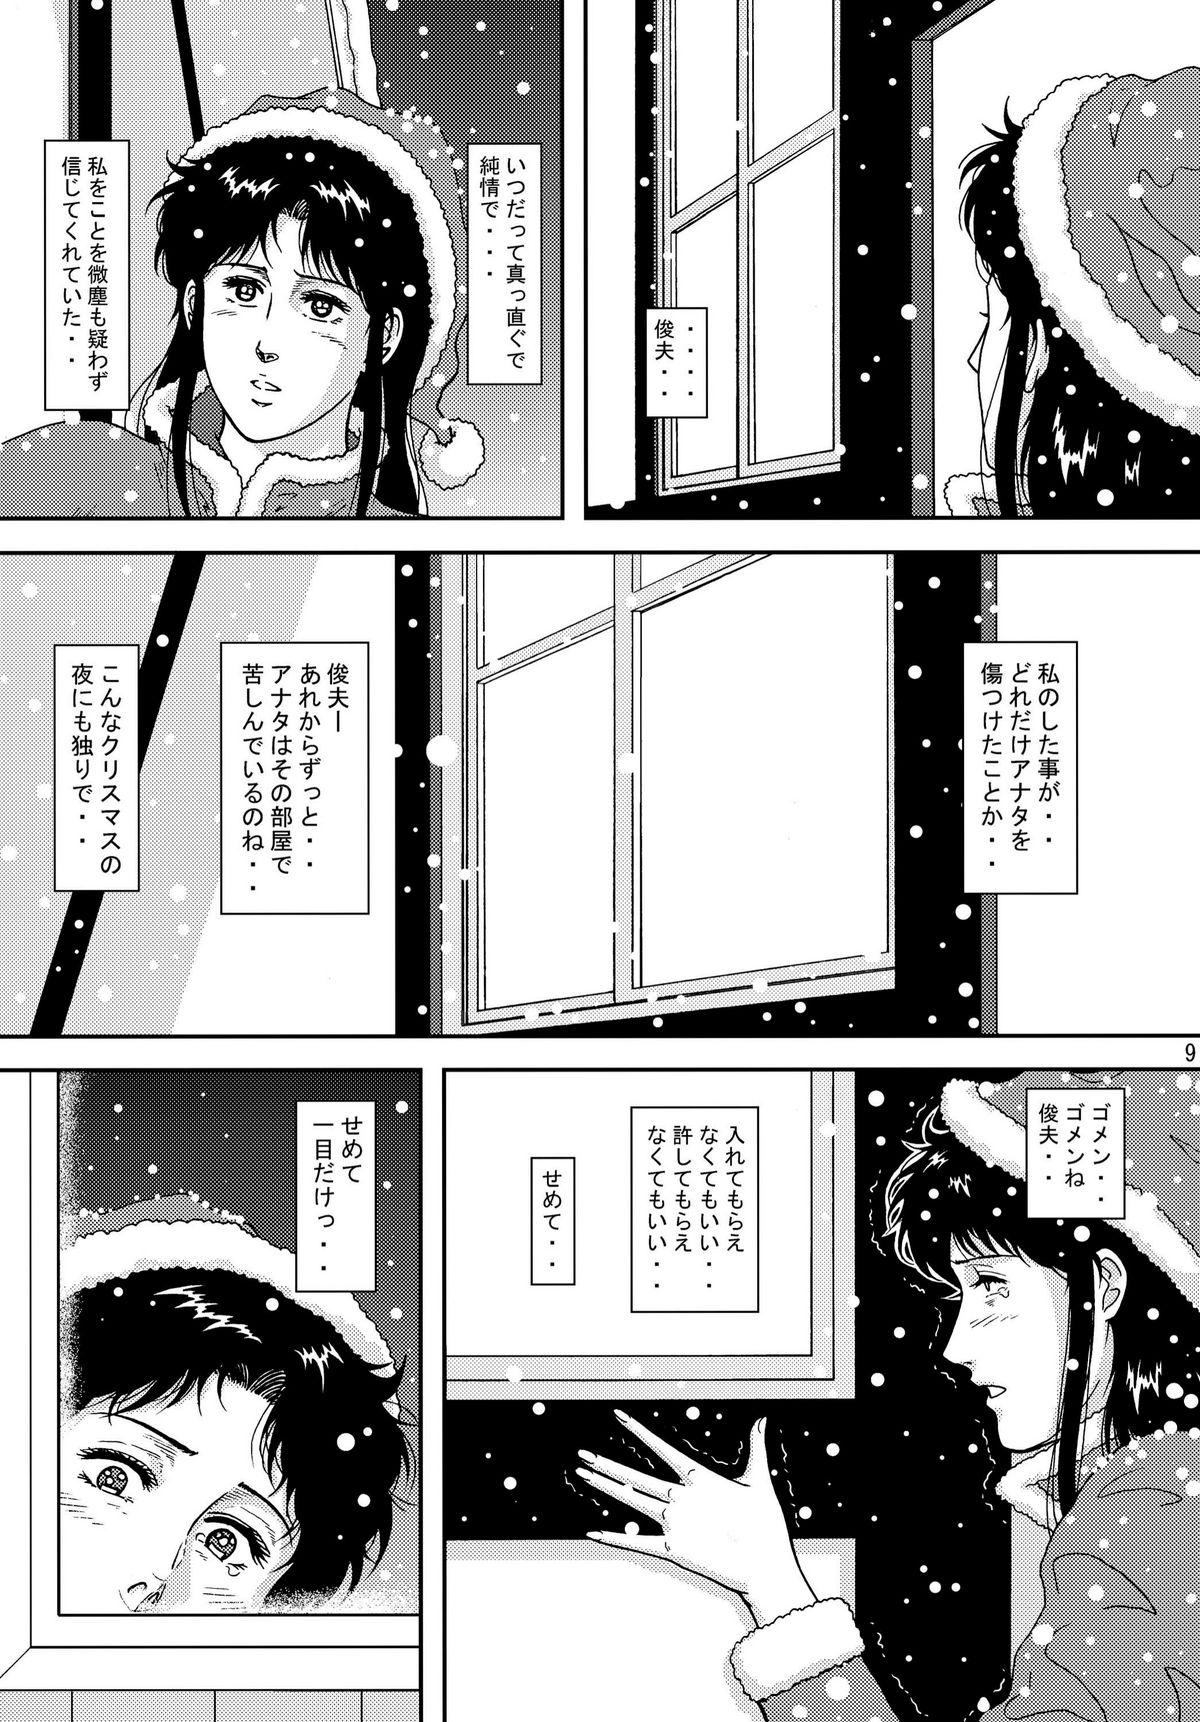 Korean NIGHTFLY vol.10 PLEASE COME HOME for X'mas - Cats eye Topless - Page 9